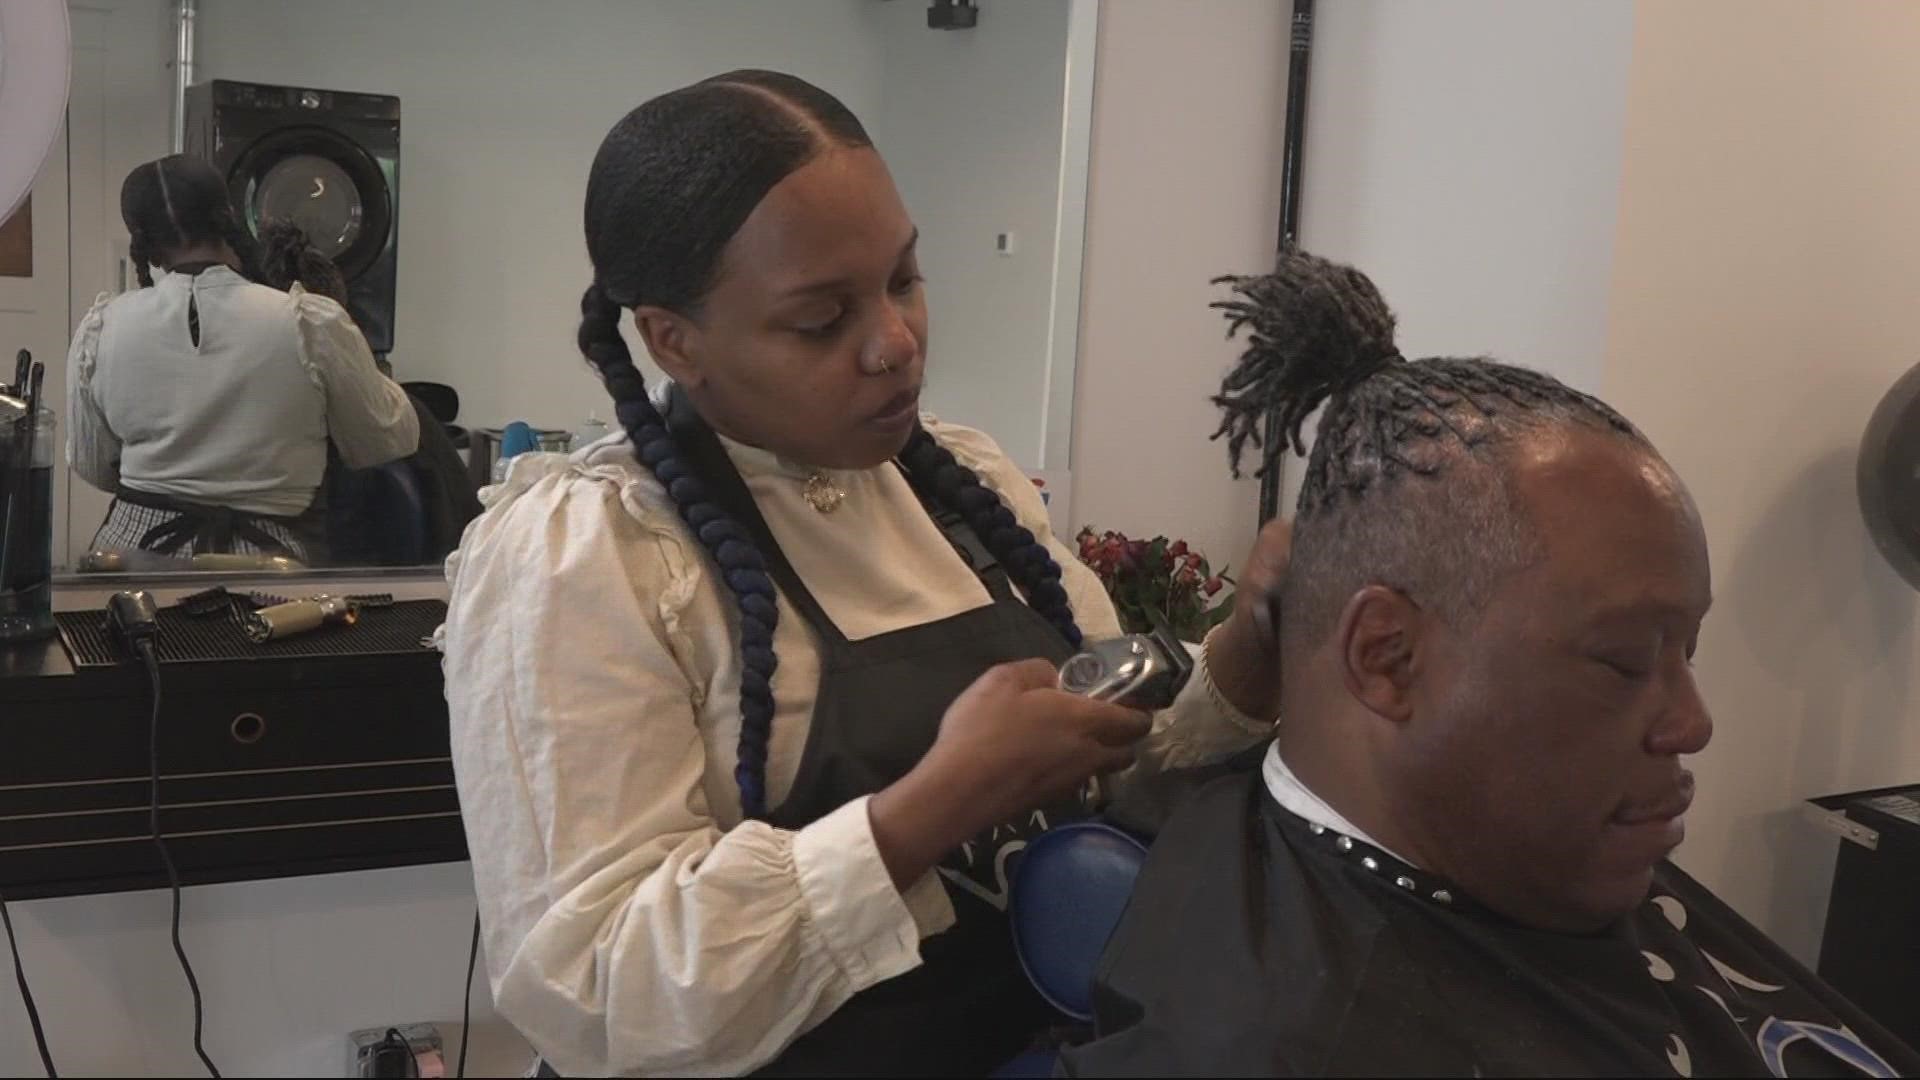 Lasheera Chambers opened her northeast Portland barbershop last month. It’s the culmination of her personal success story